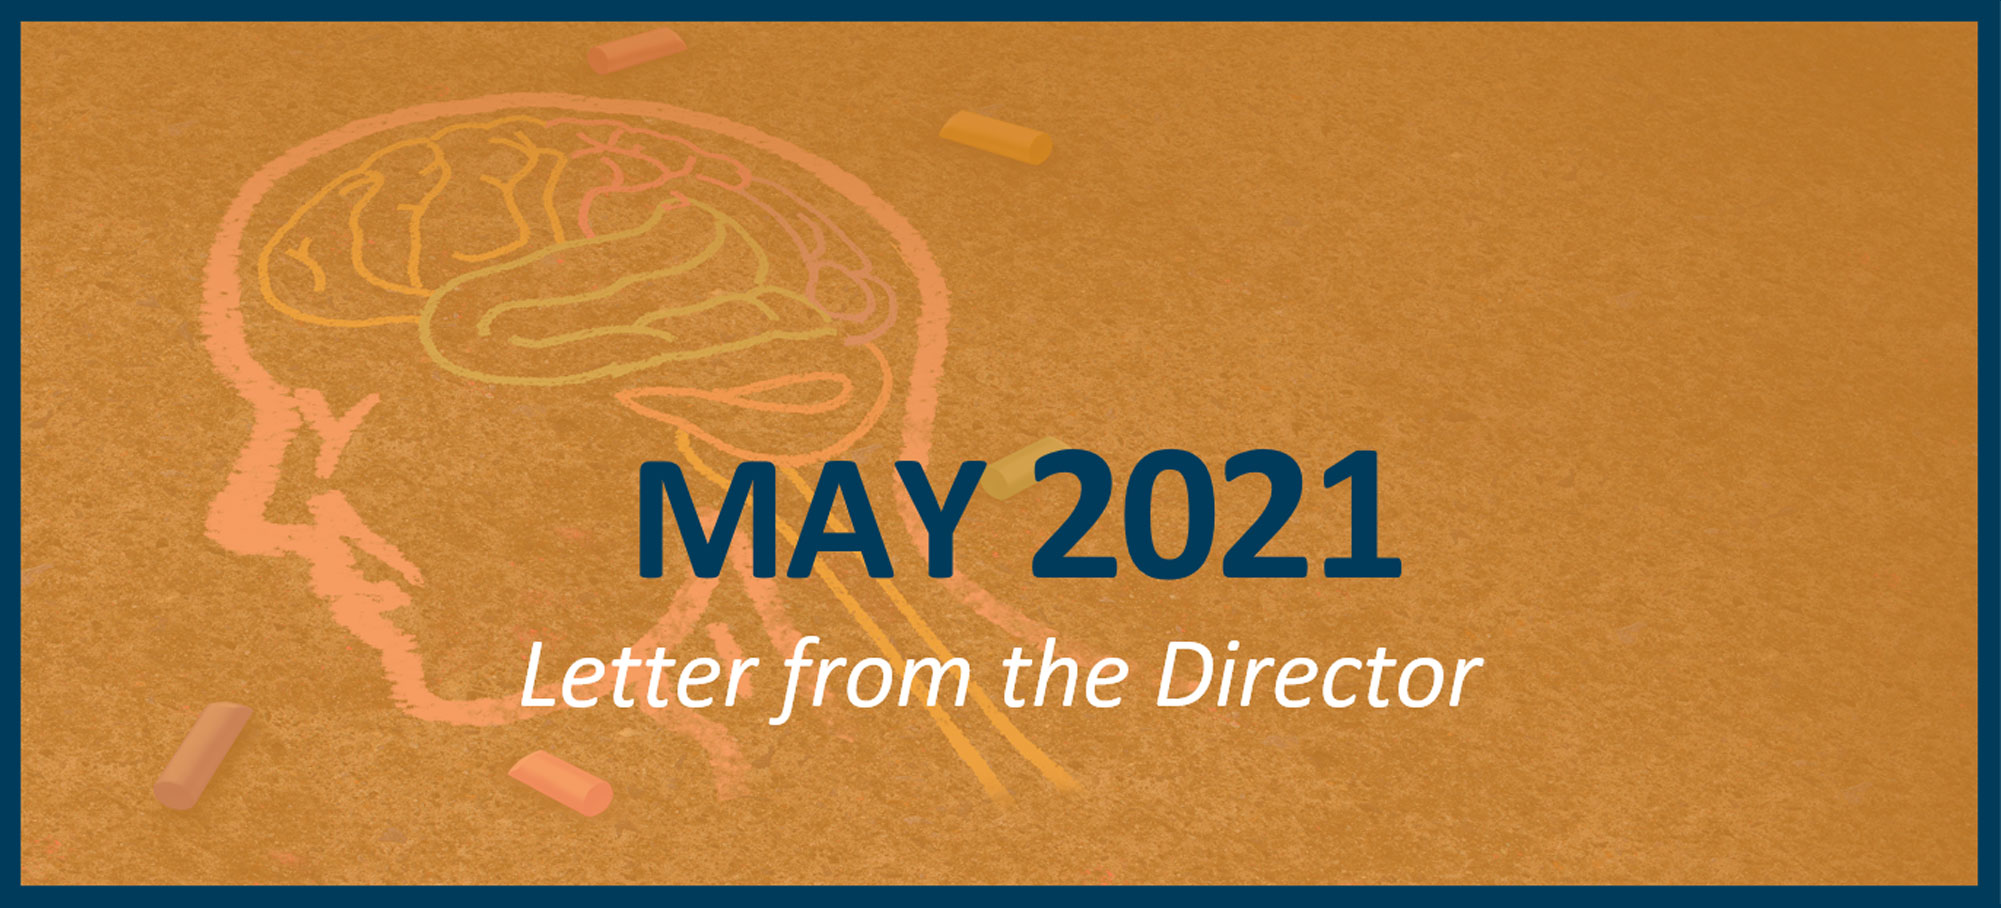 May 2021 - Letter from the Director